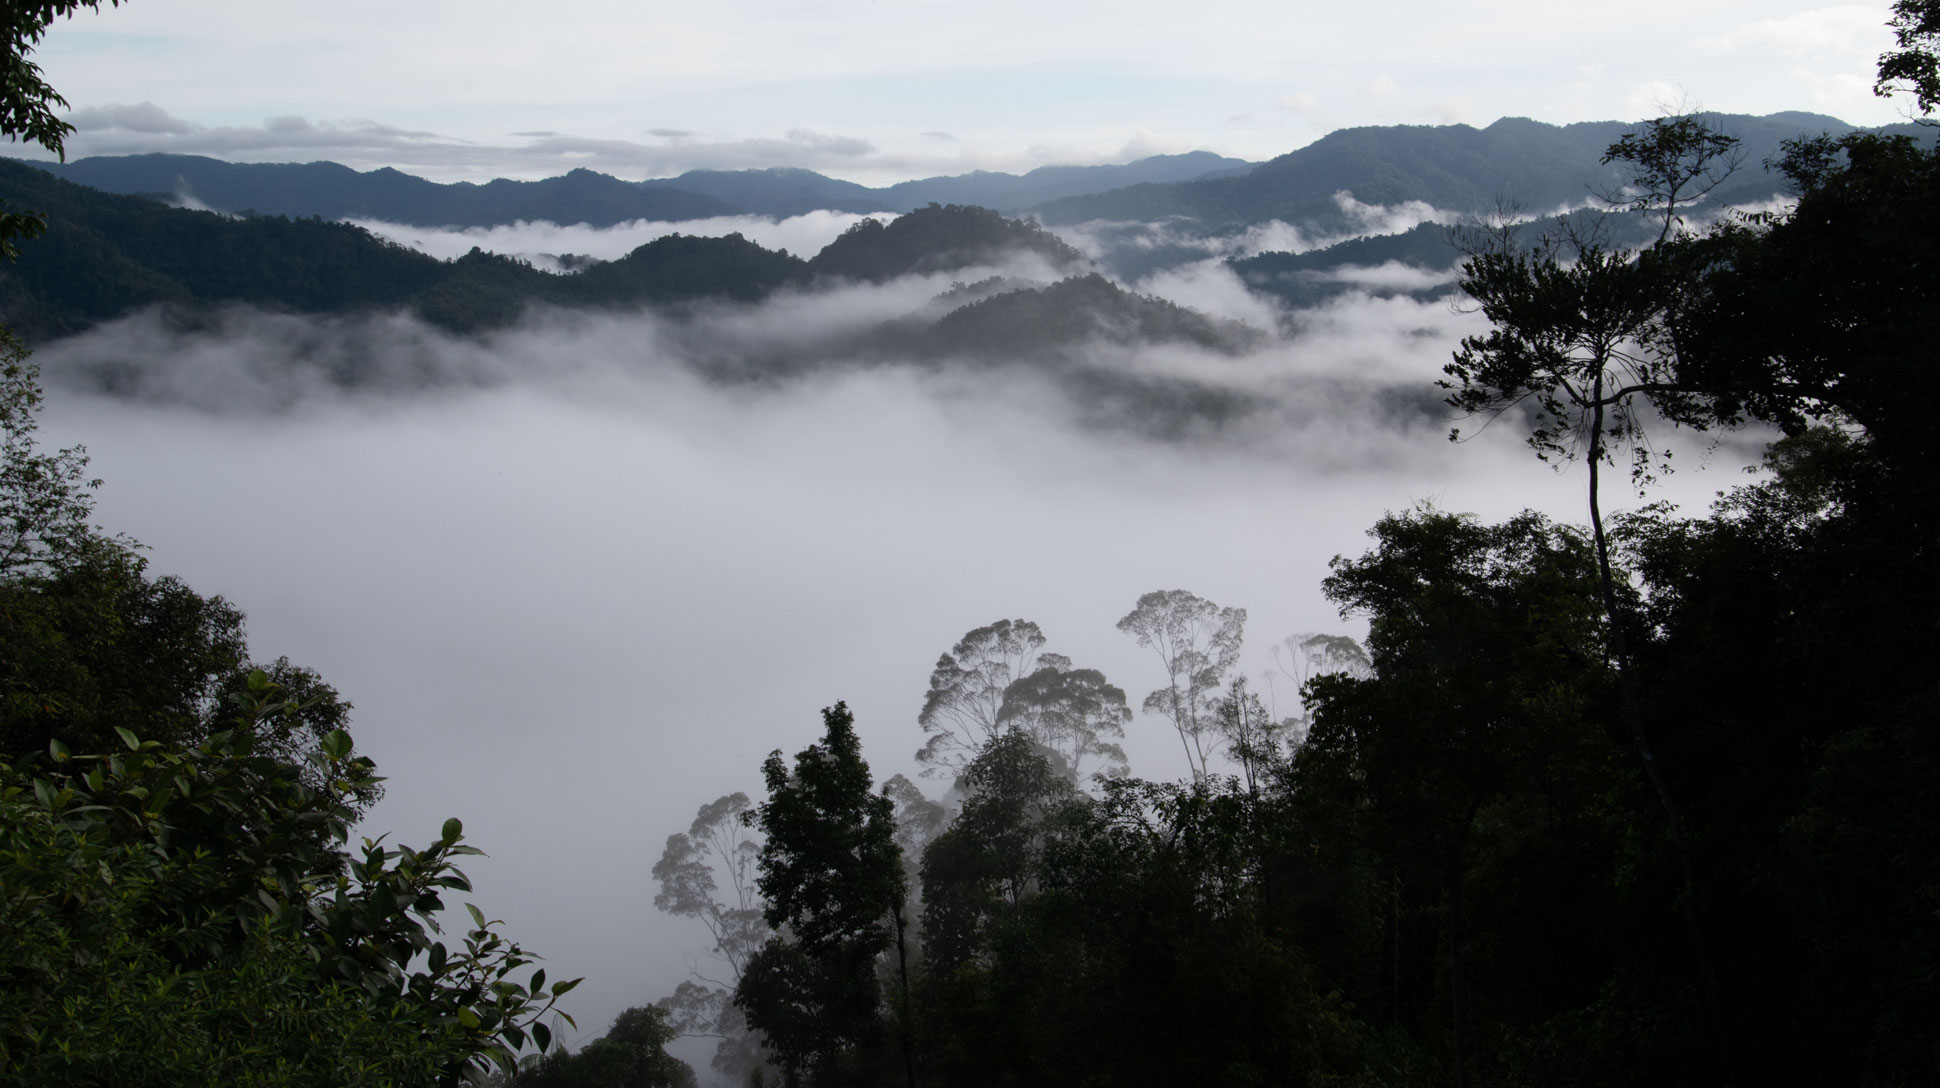 Looking down and across a very cloudy tropical forest in Borneo. Rolling mountains of dark forest are covered with low lying clouds. The peaks of small mountains peep from the cloud.